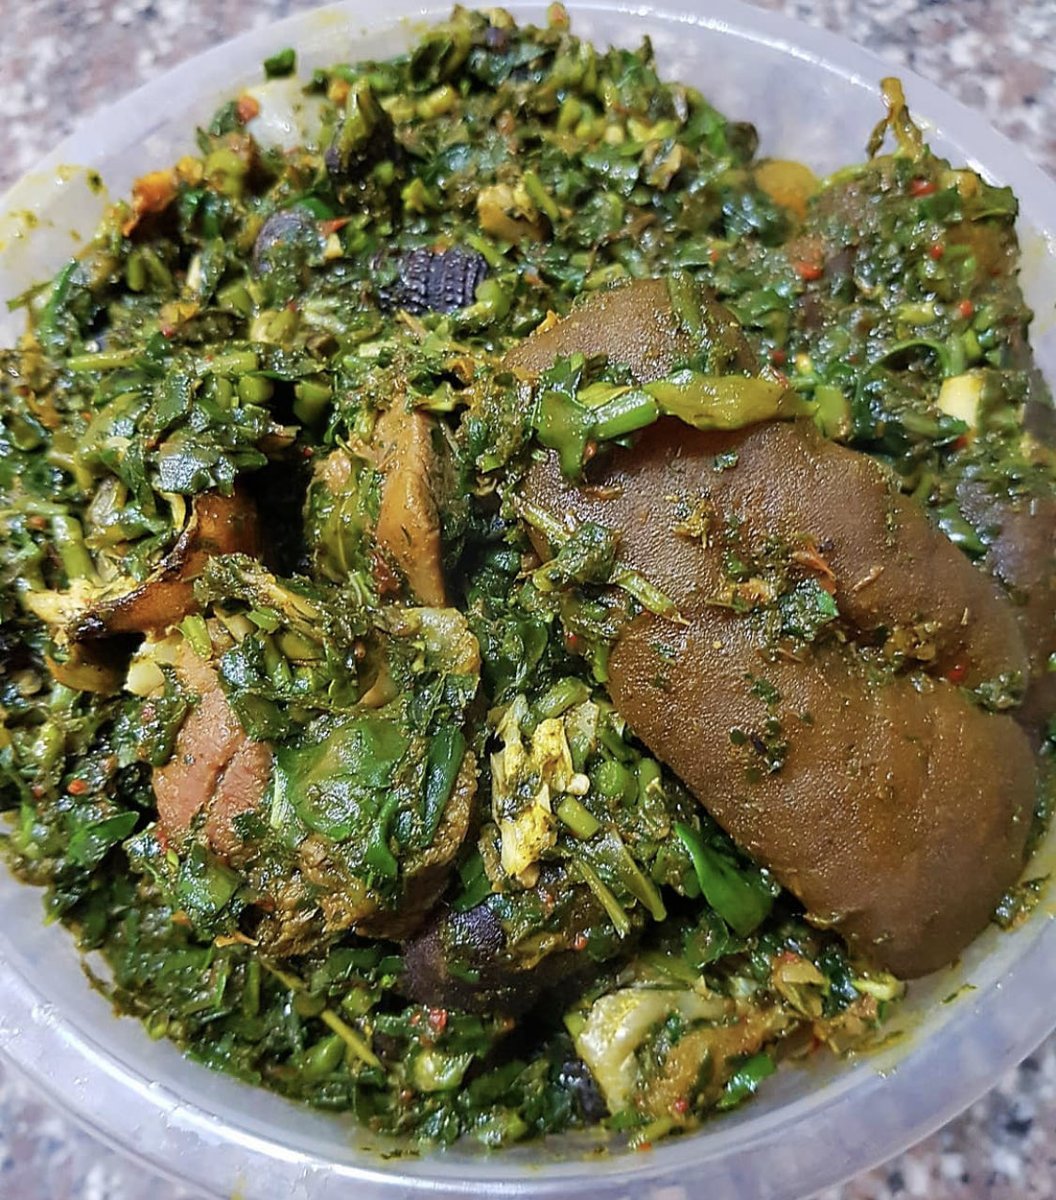 Afang soup or Ogbono soup